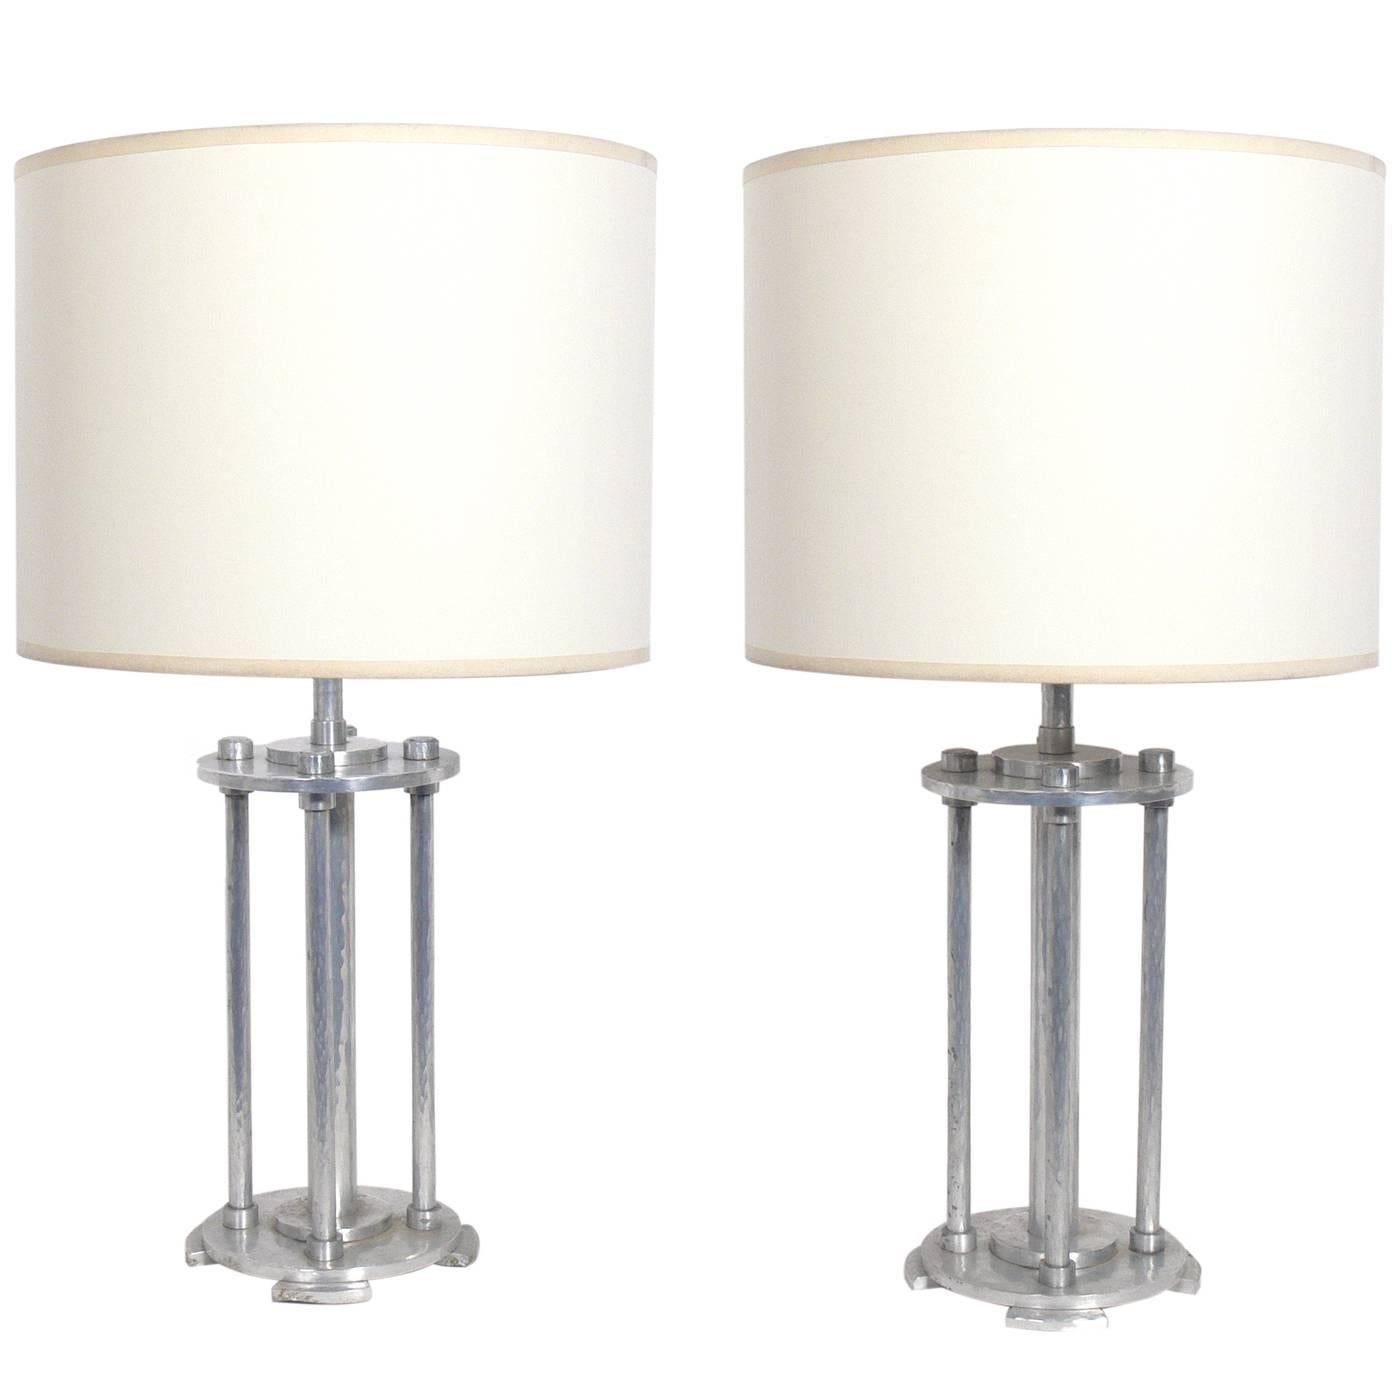 Pair of Art Deco Hammered Aluminium Lamps Attributed to Palmer Smith